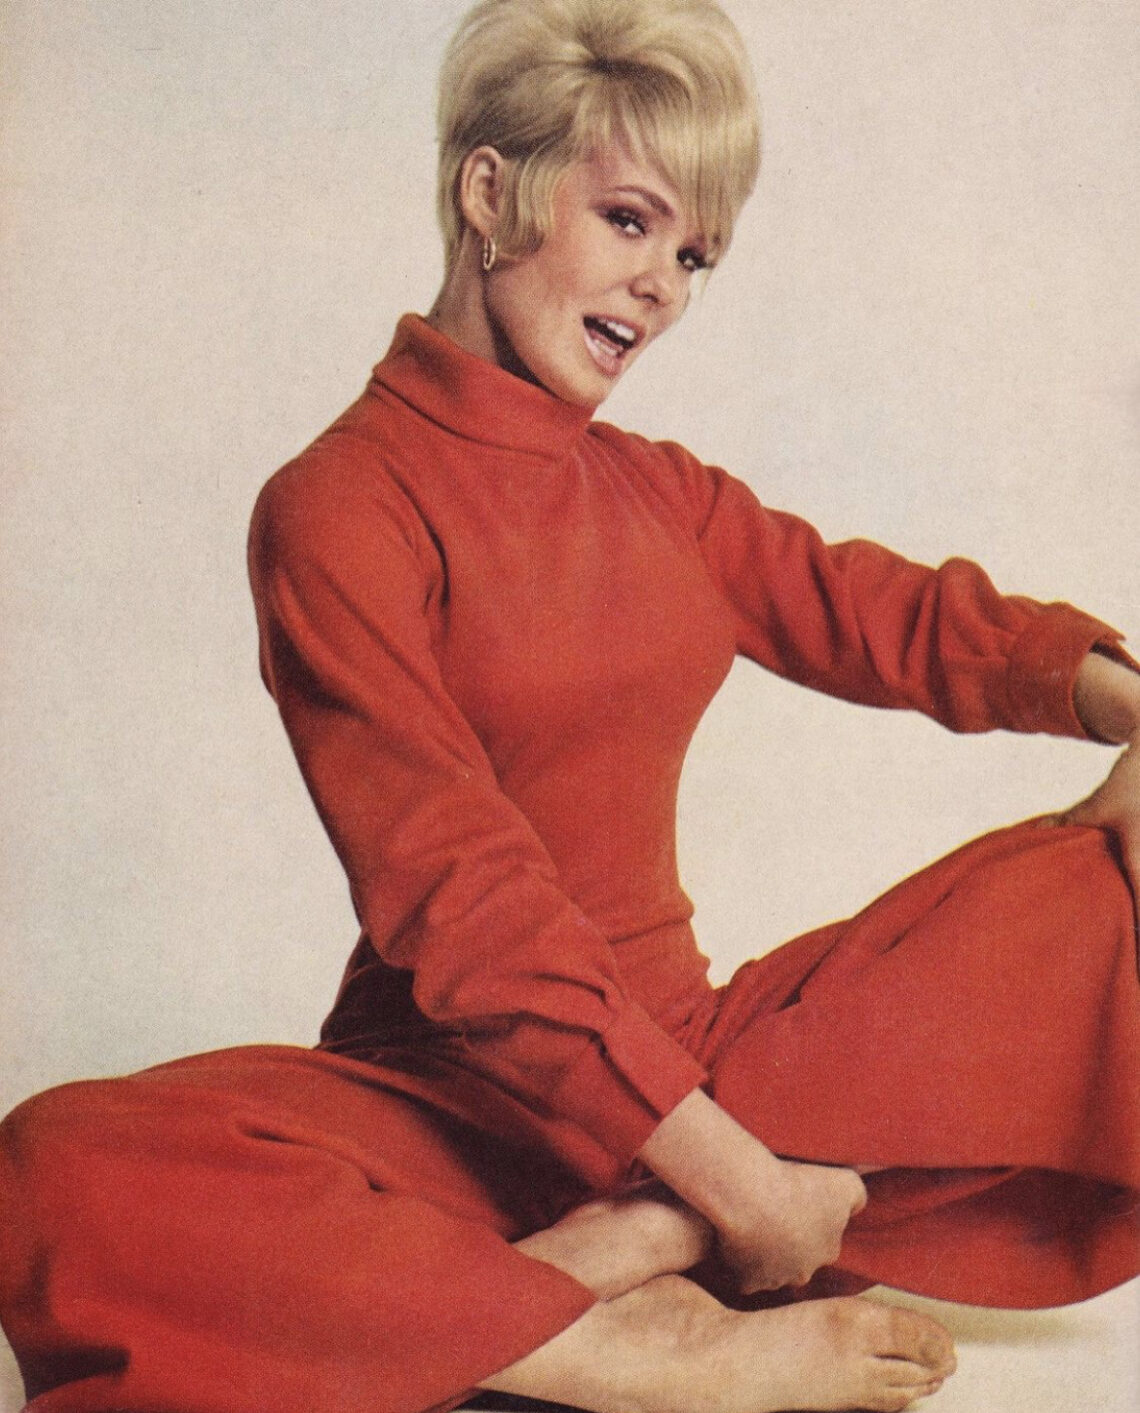 Joey Heatherton Biography Age Movies Is She Still Alive